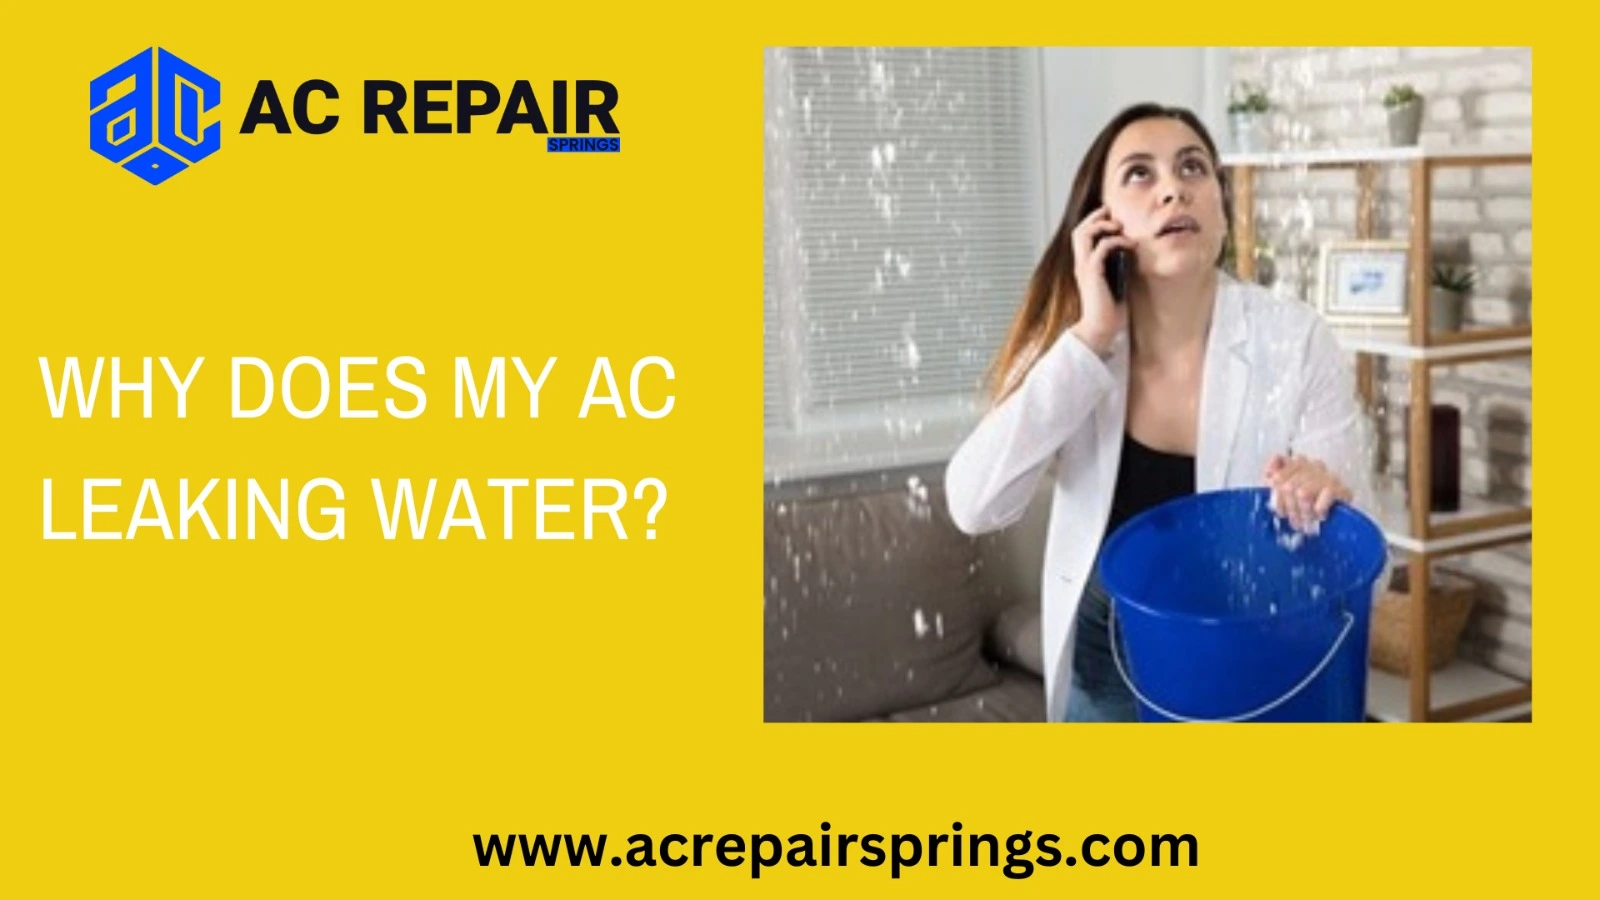 Why Does My AC Leaking Water?